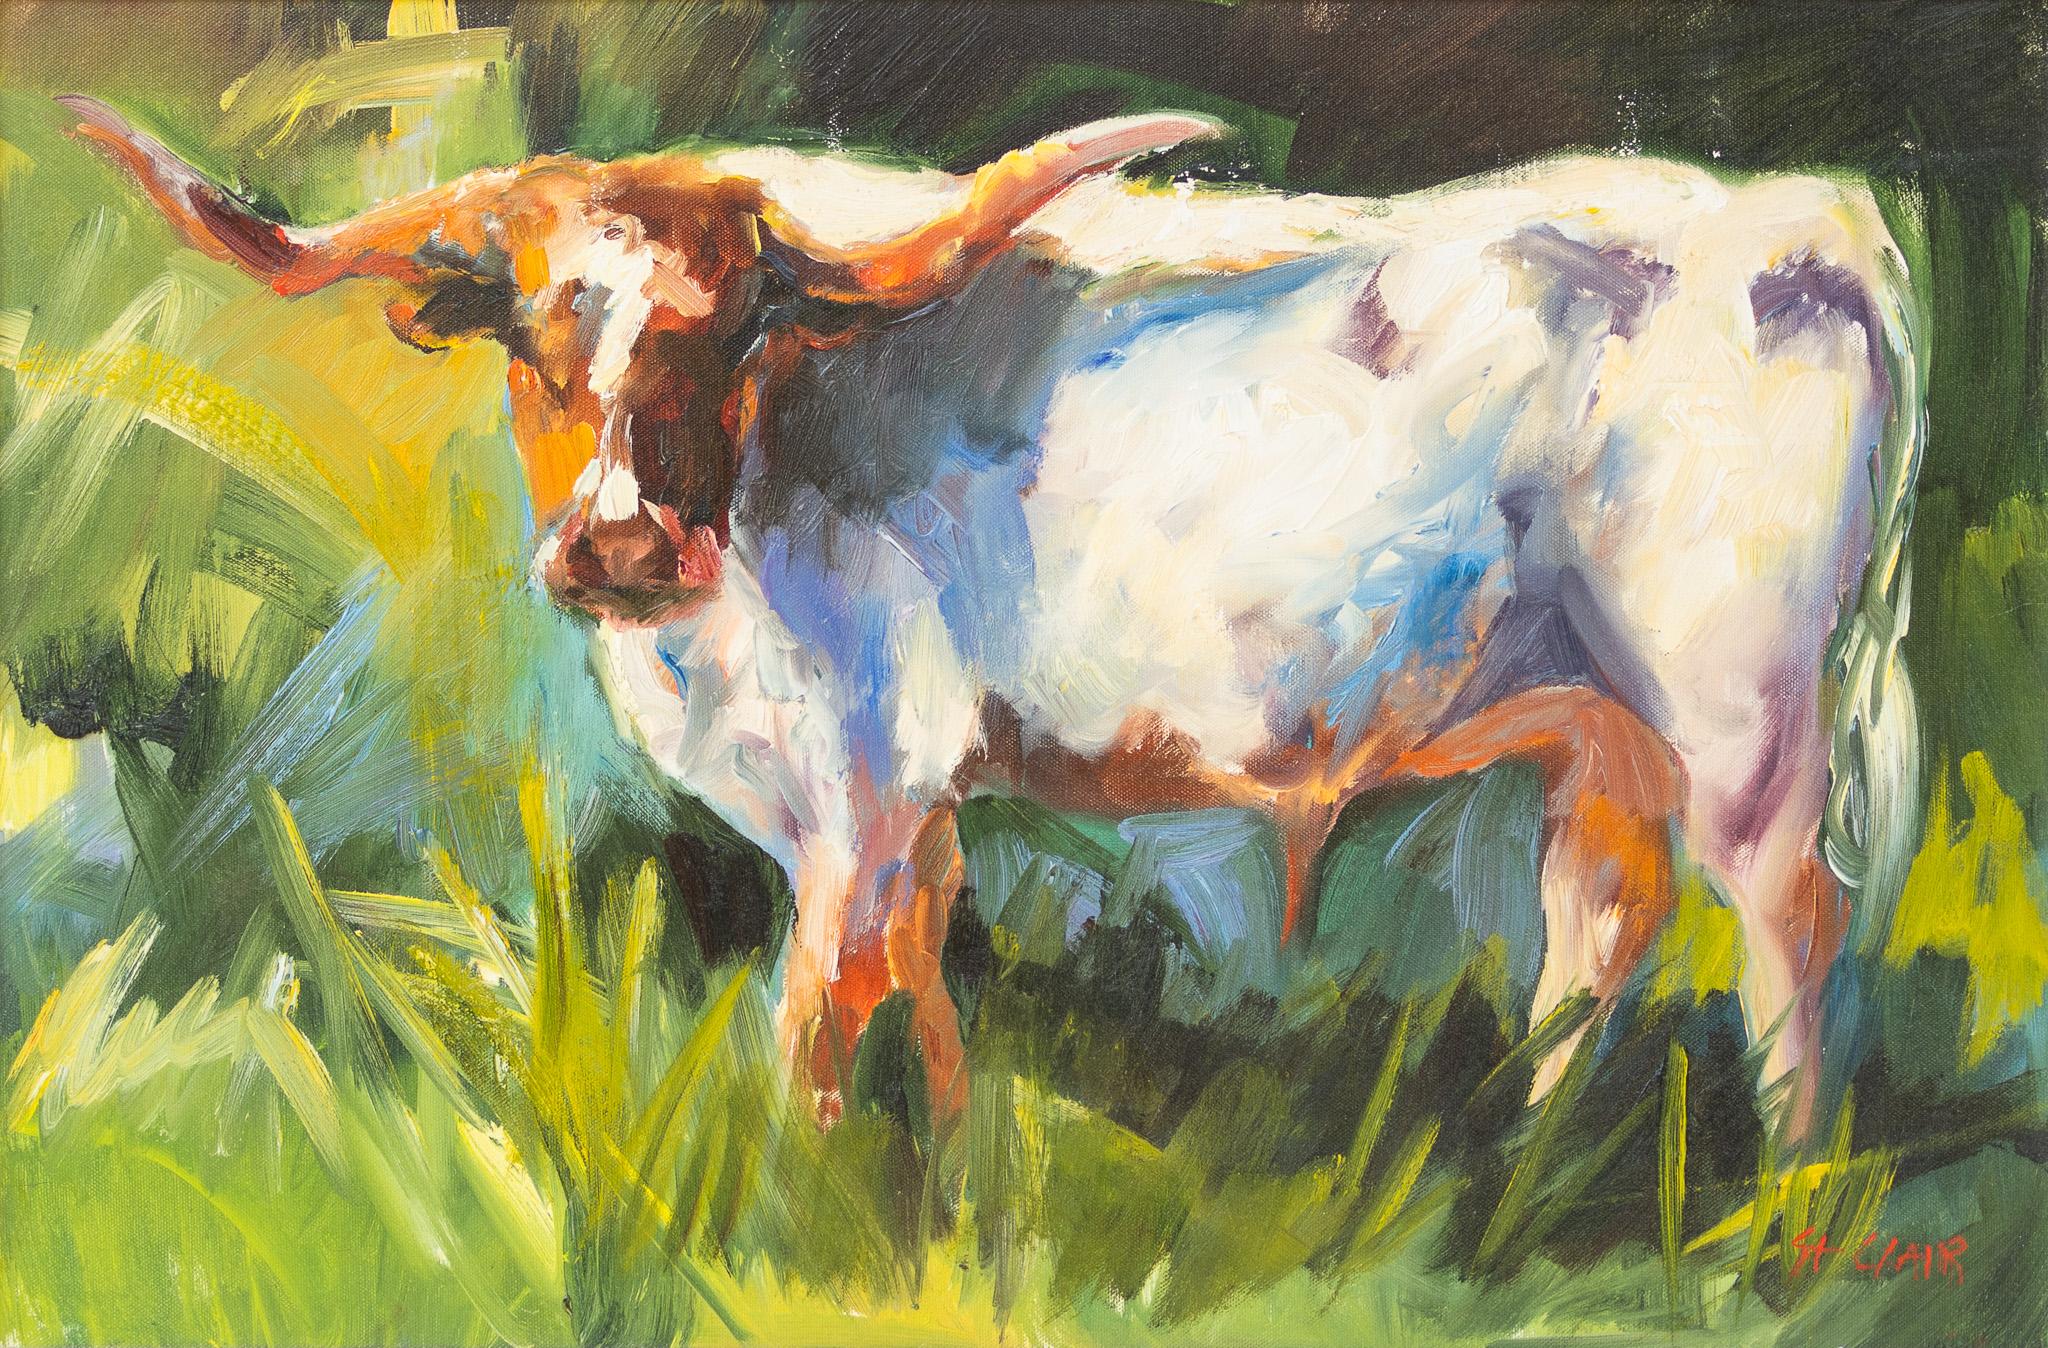 Linda St. Clair Animal Painting - "Longhorn in a Pasture" Impressionist Cattle Scene